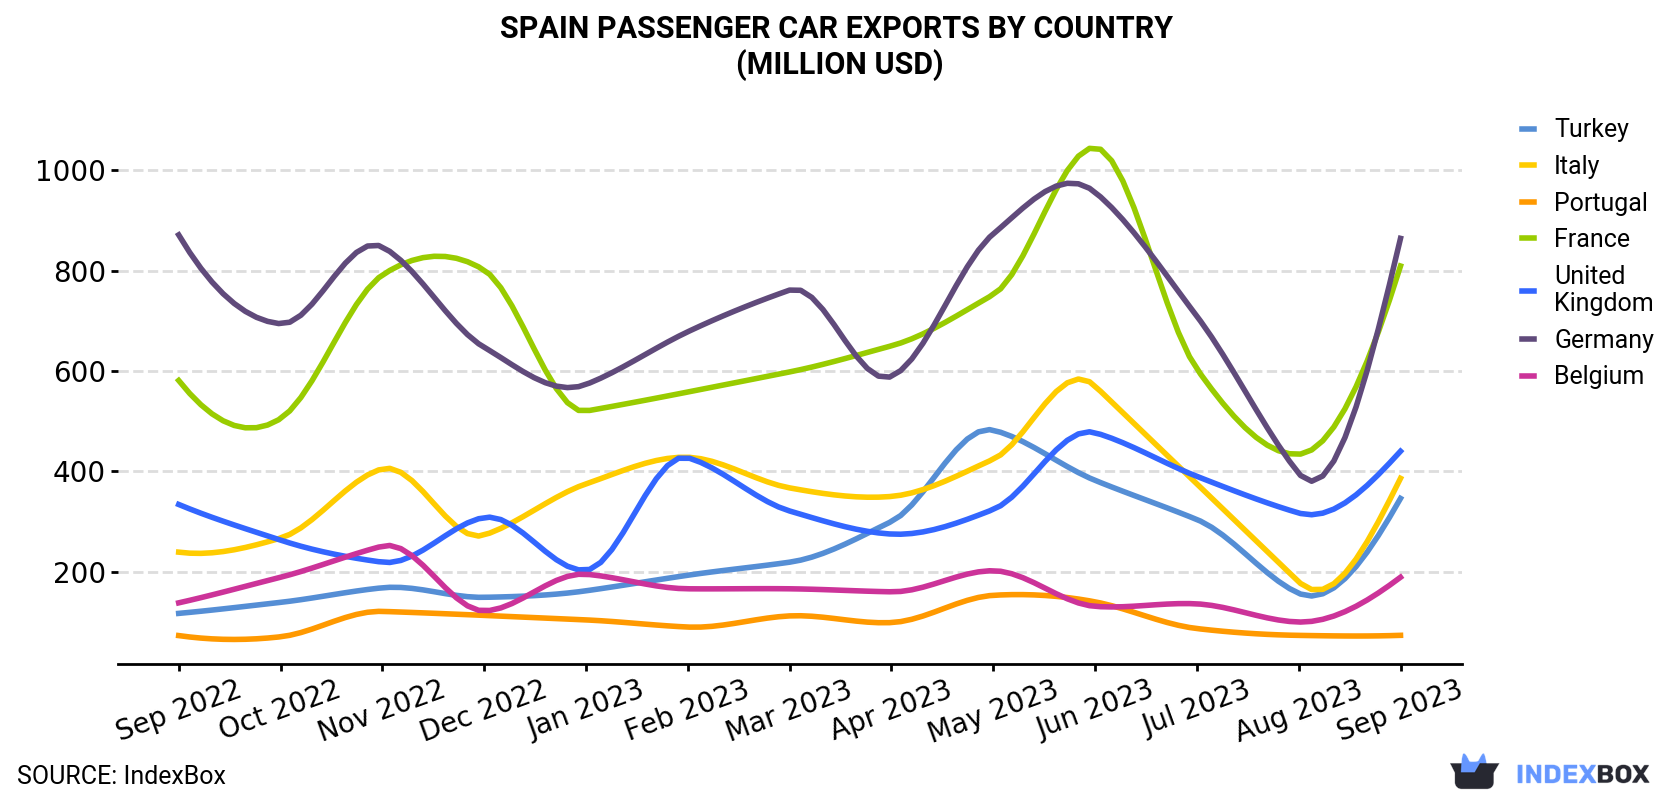 Spain Passenger Car Exports By Country (Million USD)